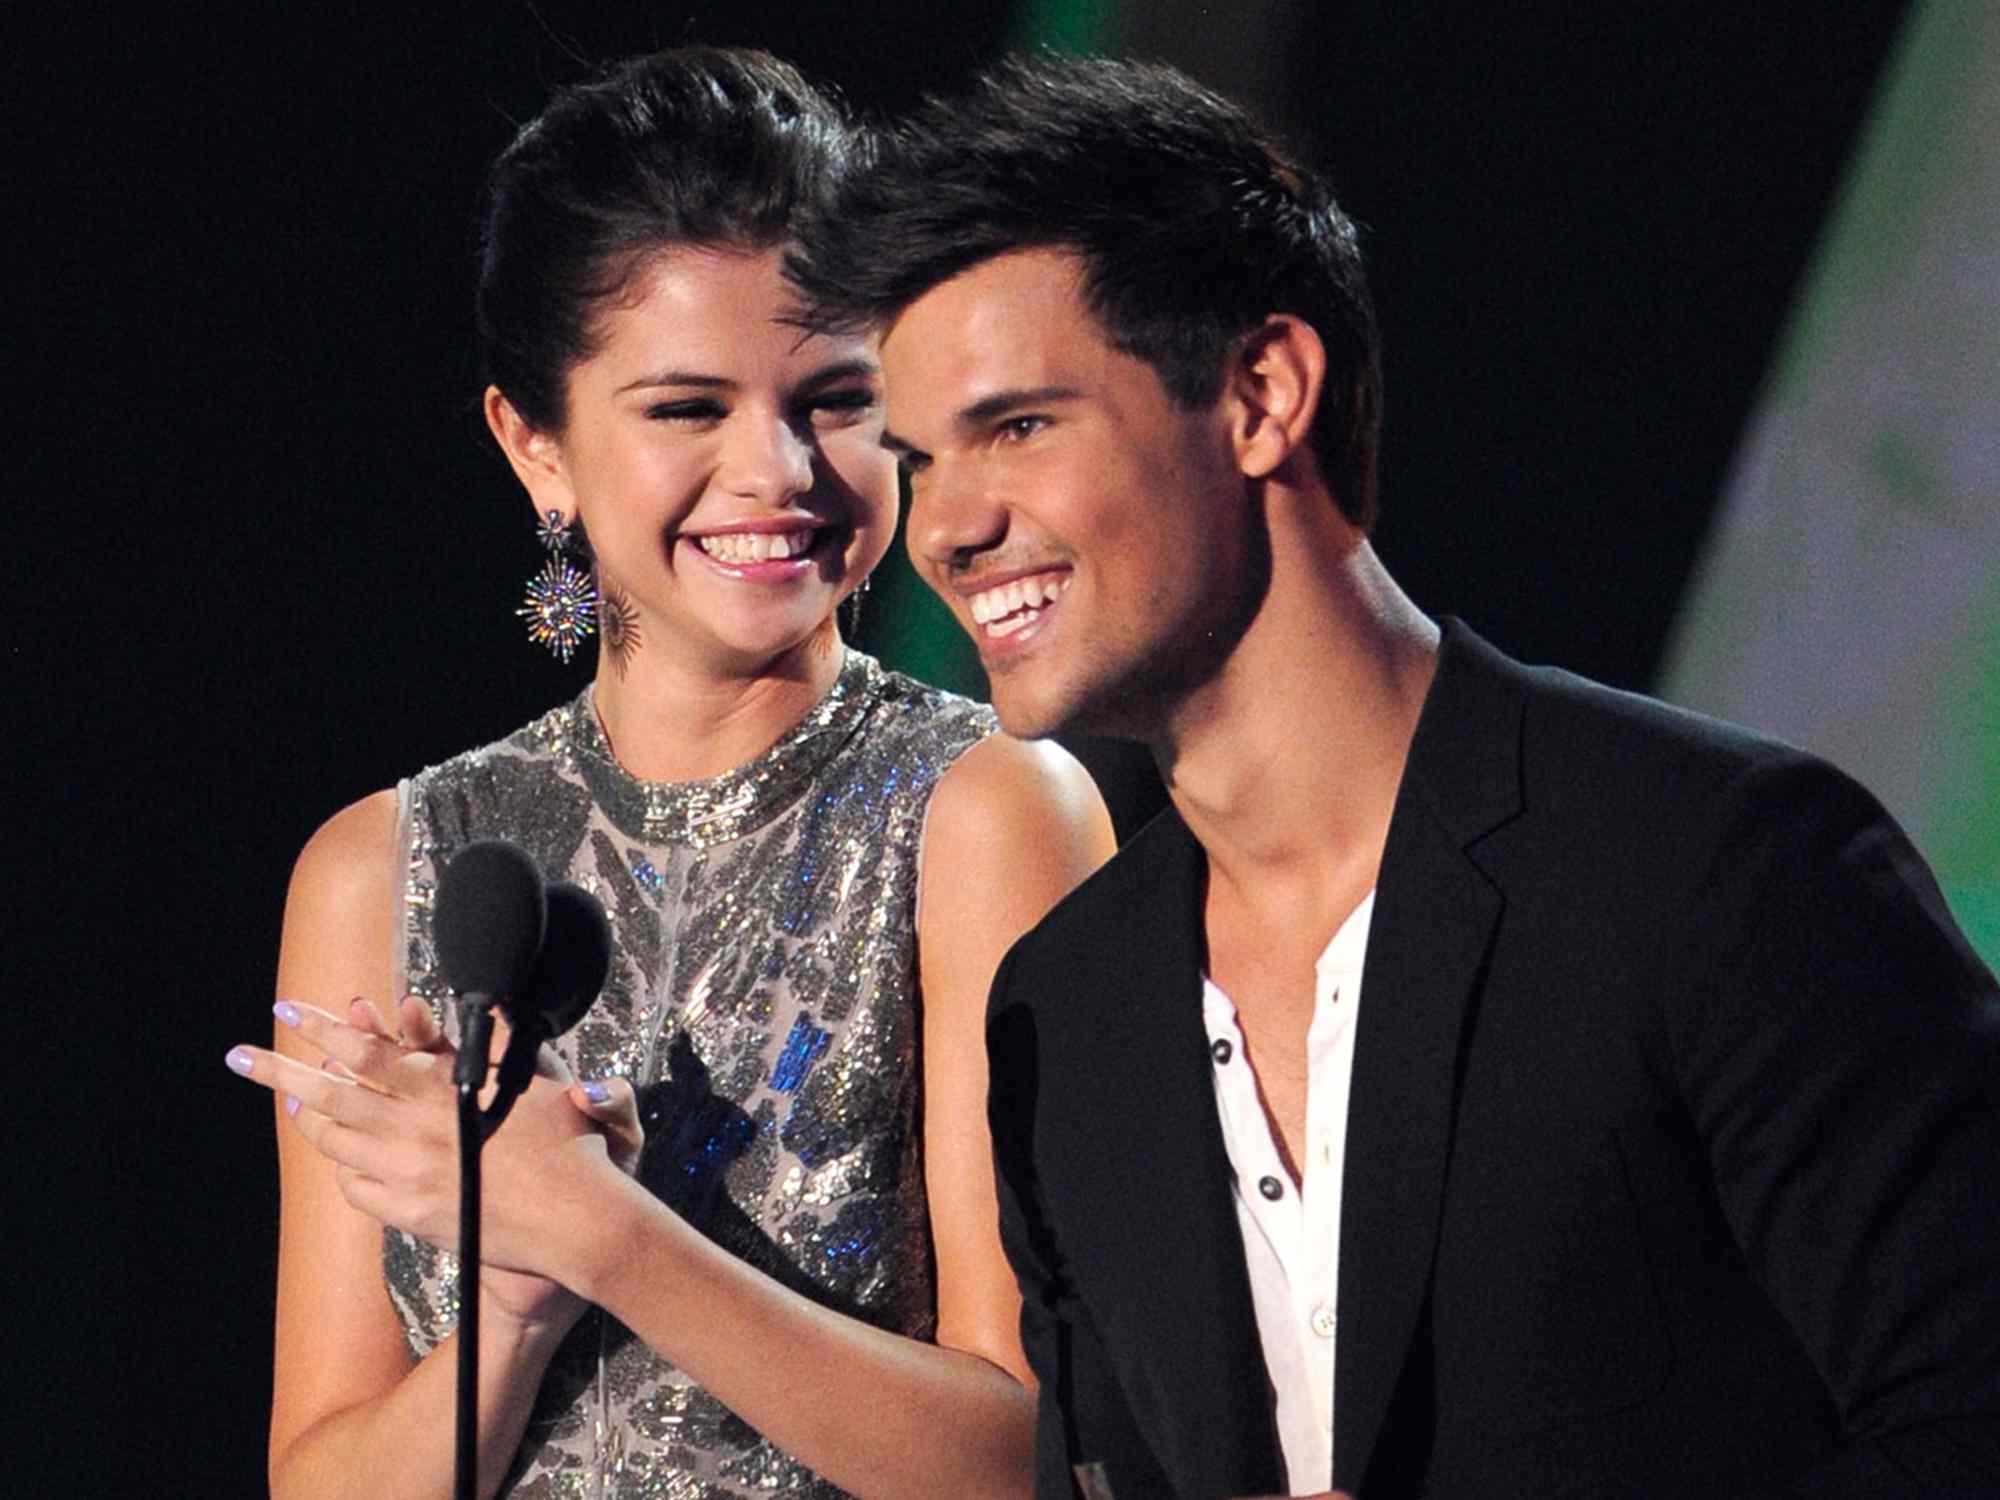 Selena Gomez and Taylor Lautner on stage at the The 28th Annual MTV Video Music Awards at Nokia Theatre L.A. LIVE on August 28, 2011 in Los Angeles, California